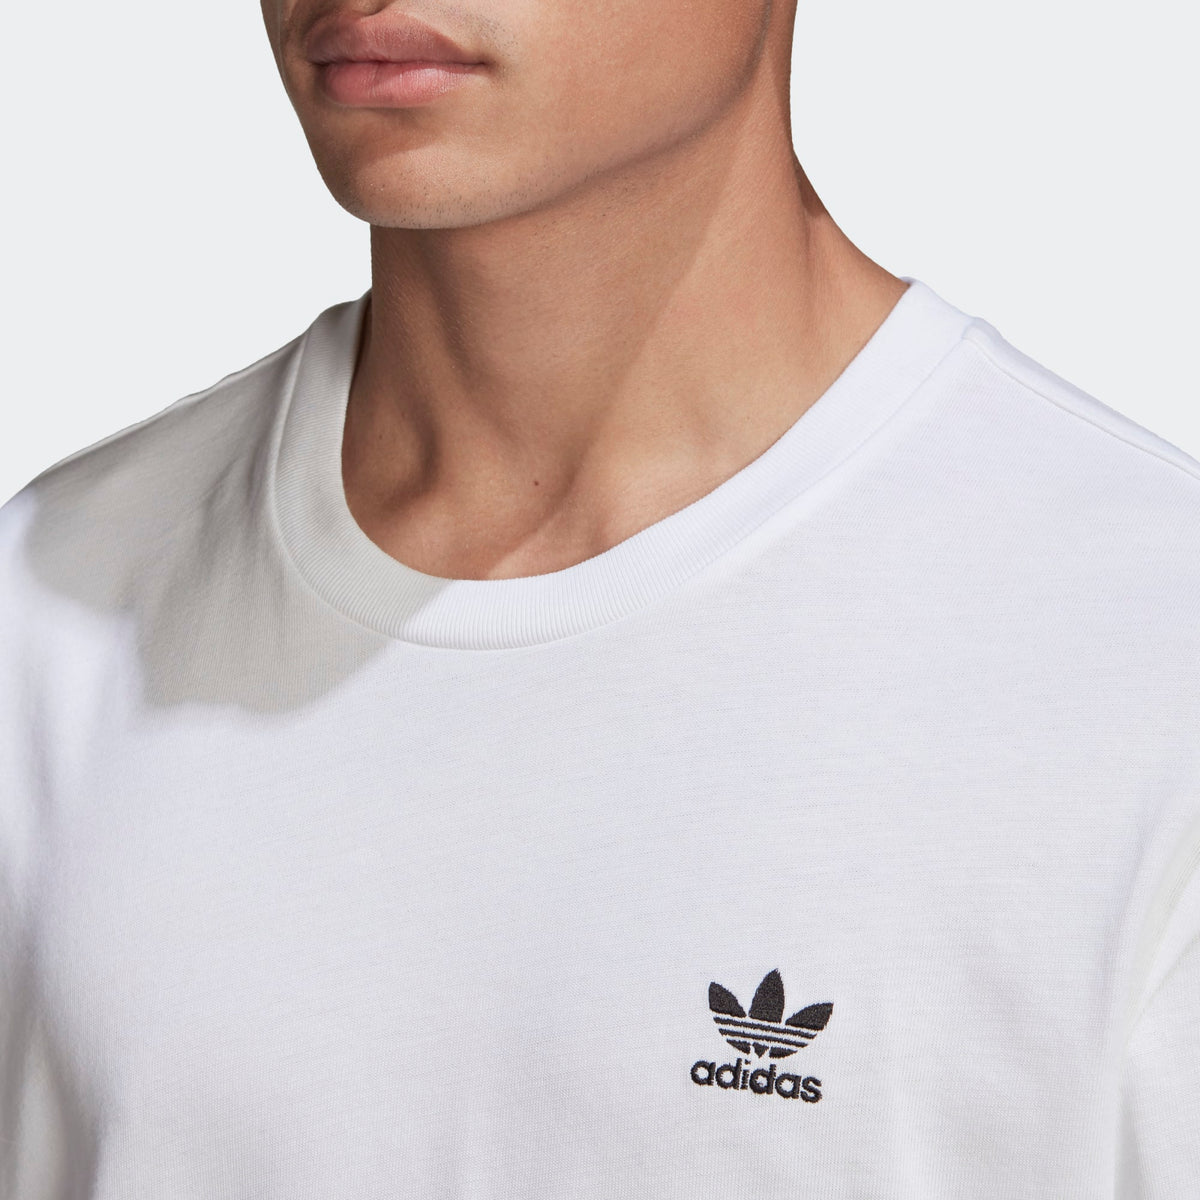 (White)(GN3453) Classics – Adicolor Logo PH Merch Adidas Boxy Embroidered Tee Trilogy